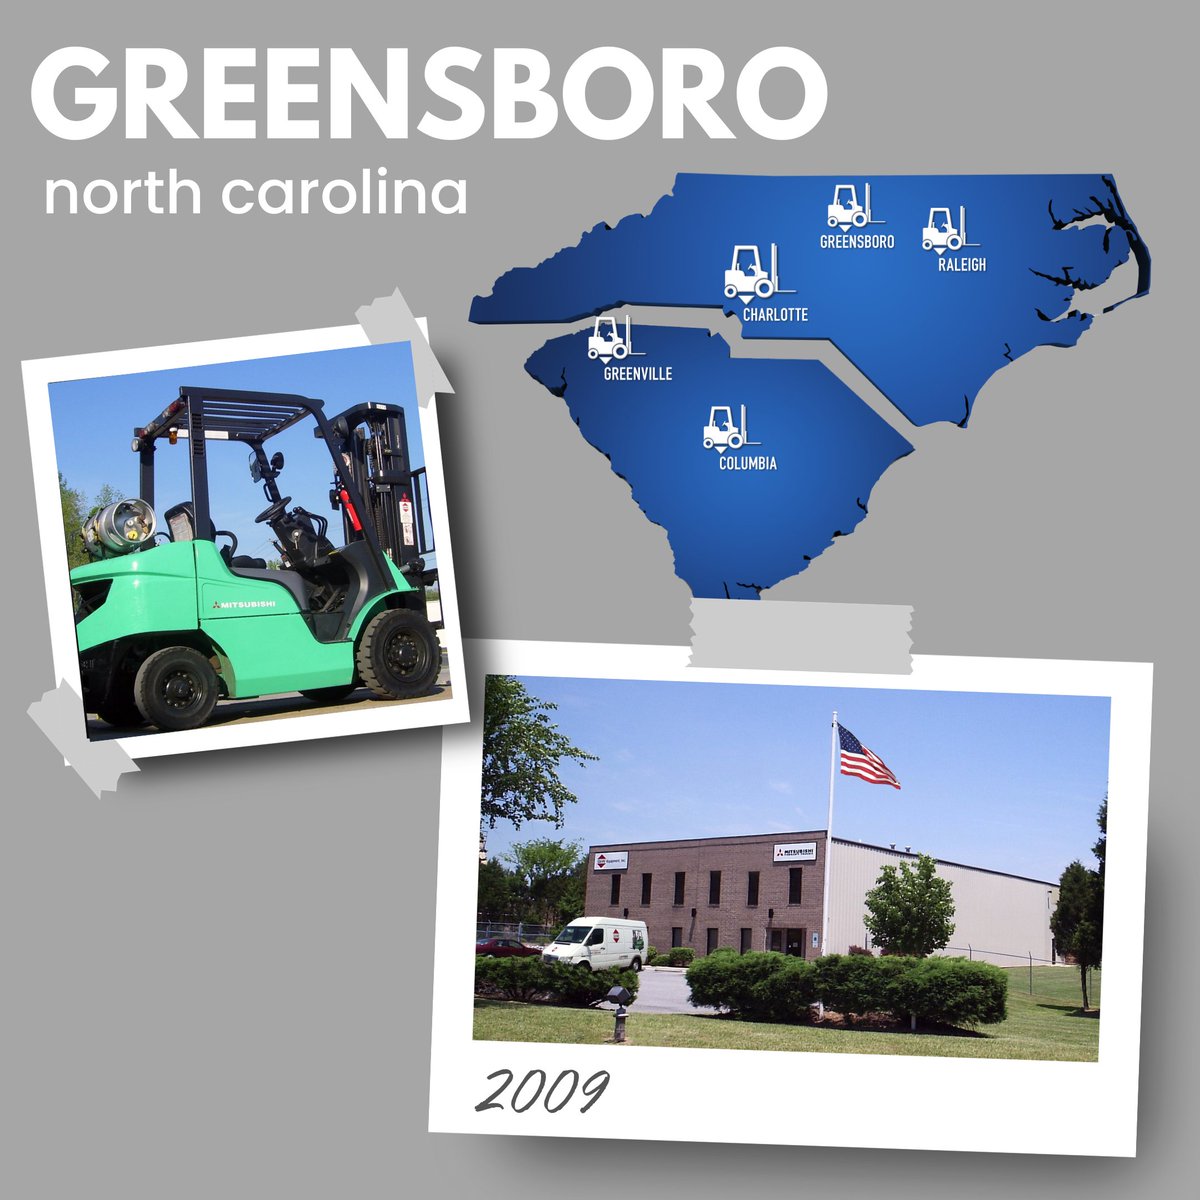 2009 was a big year as we opened our Greensboro, NC branch. We were quickly awarded the Mitsubishi dealership for Greensboro, making G&W the premier dealer covering all of NC & SC for Mitsubishi and MCFA.  
#GWEquipment #Forklifts #60Anniversary #6Decades #HappyBirthdayGW